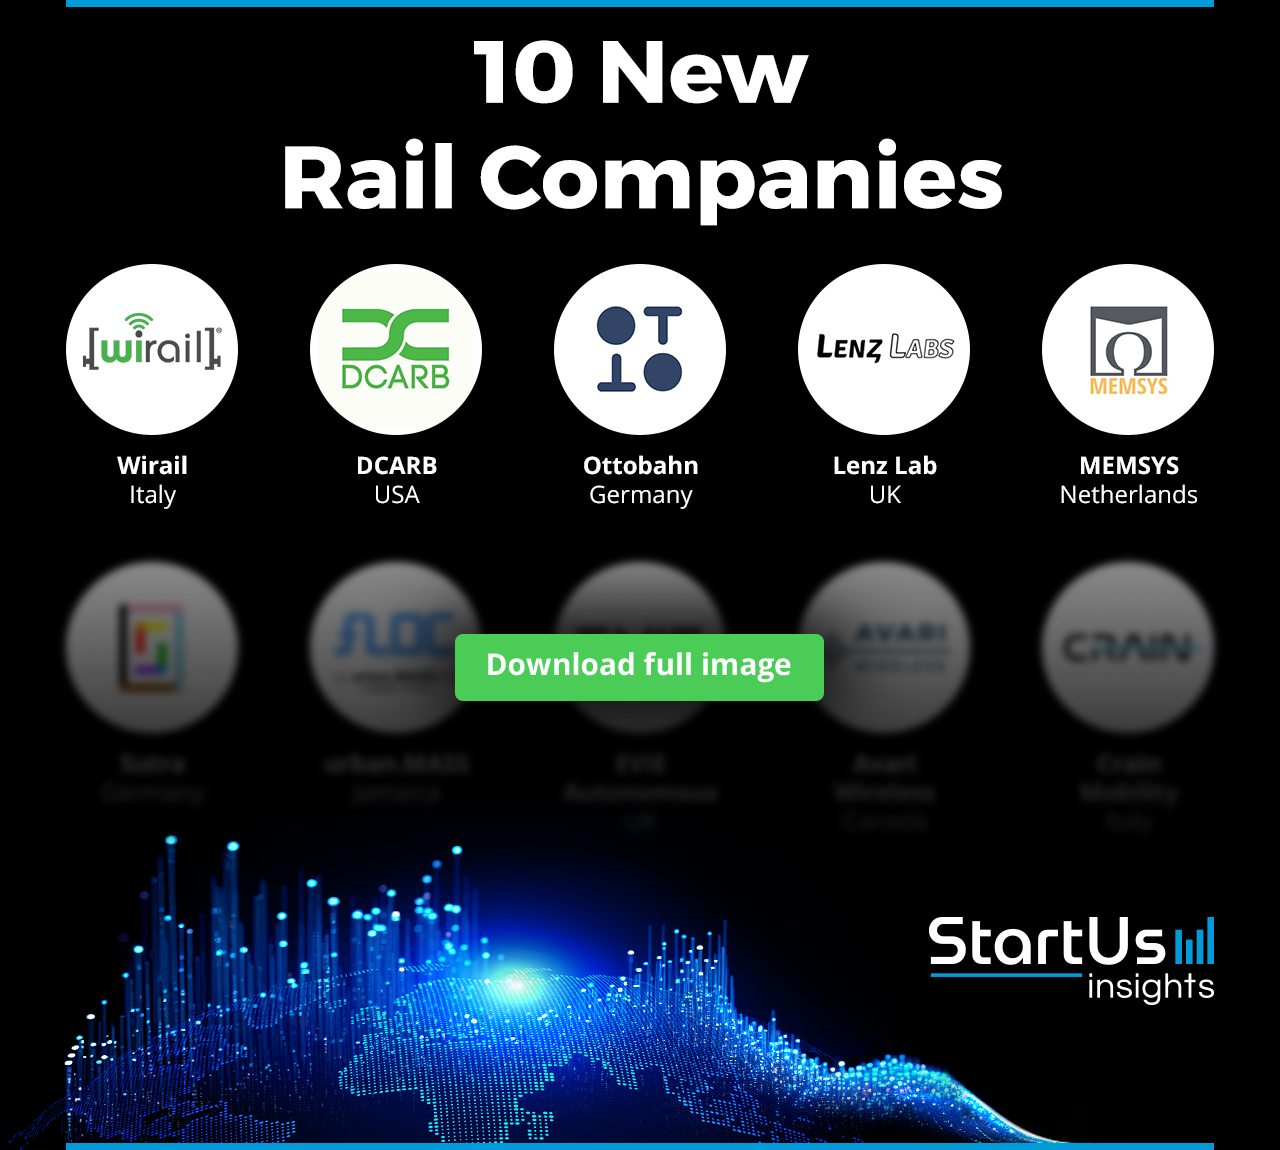 New-Rail-Companies-Logos-Blurred-StartUs-Insights-noresize